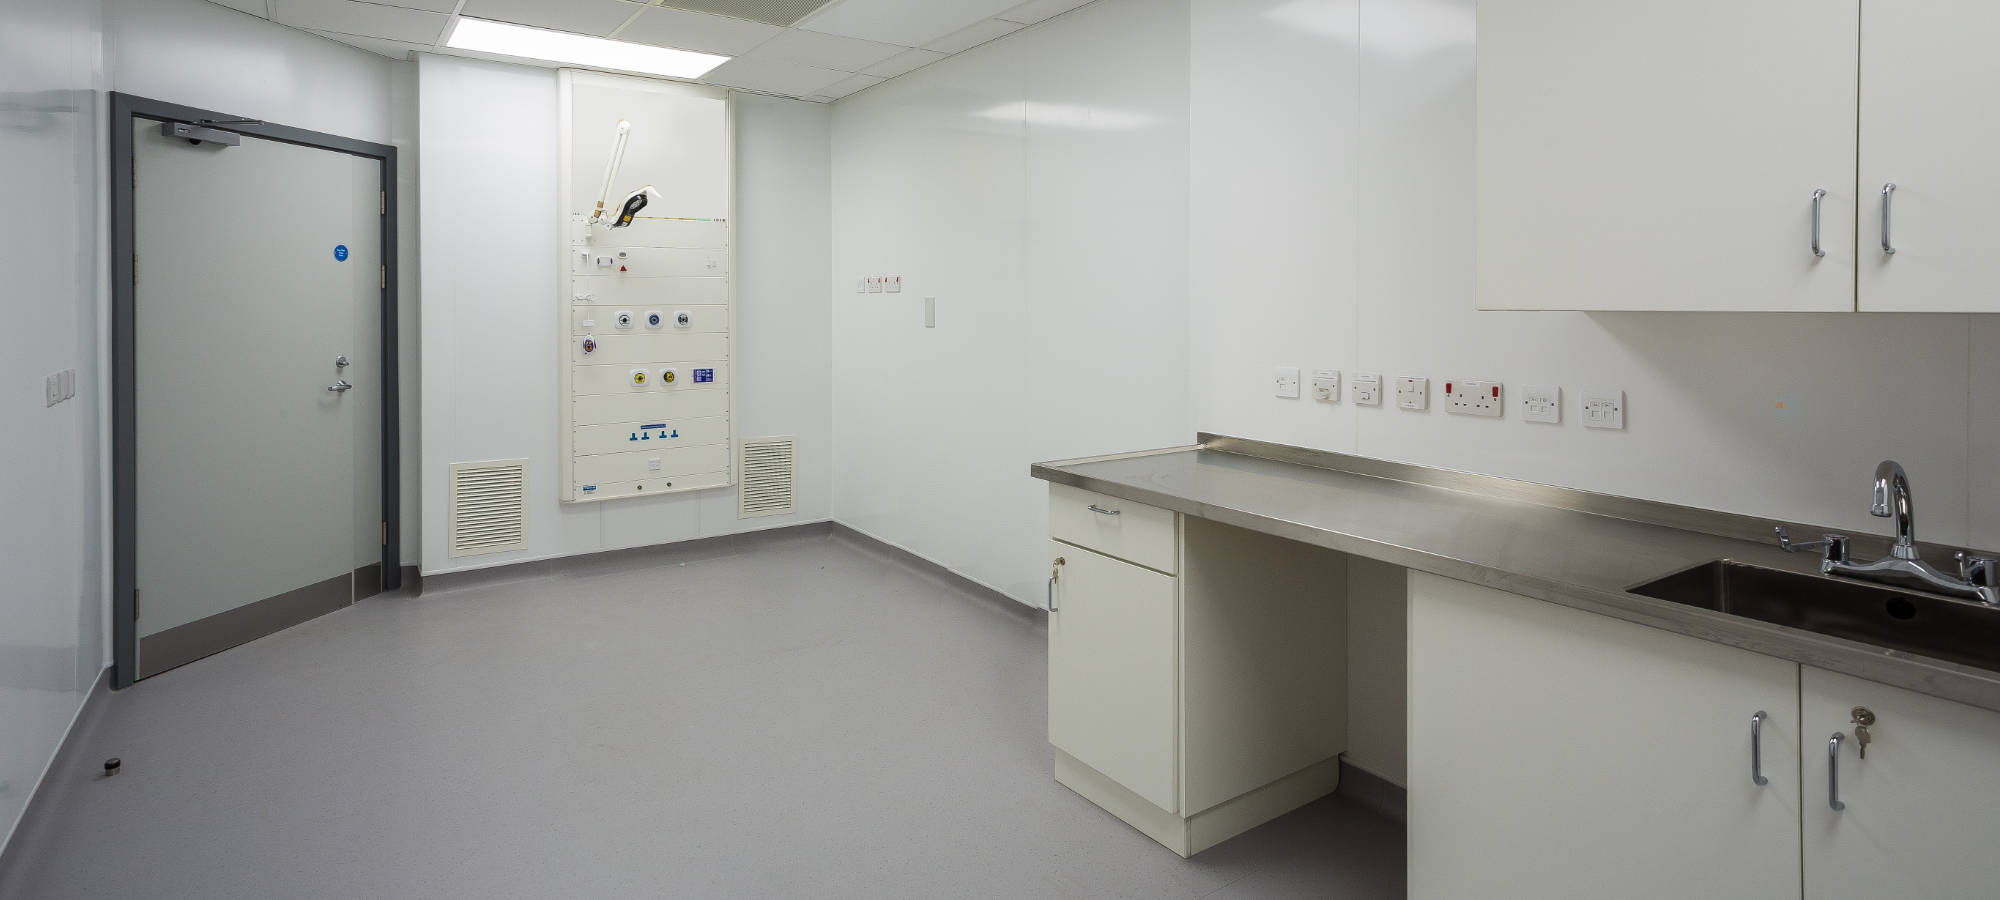 Imaging Matters constructed this MRI imaging facility in East Sussex